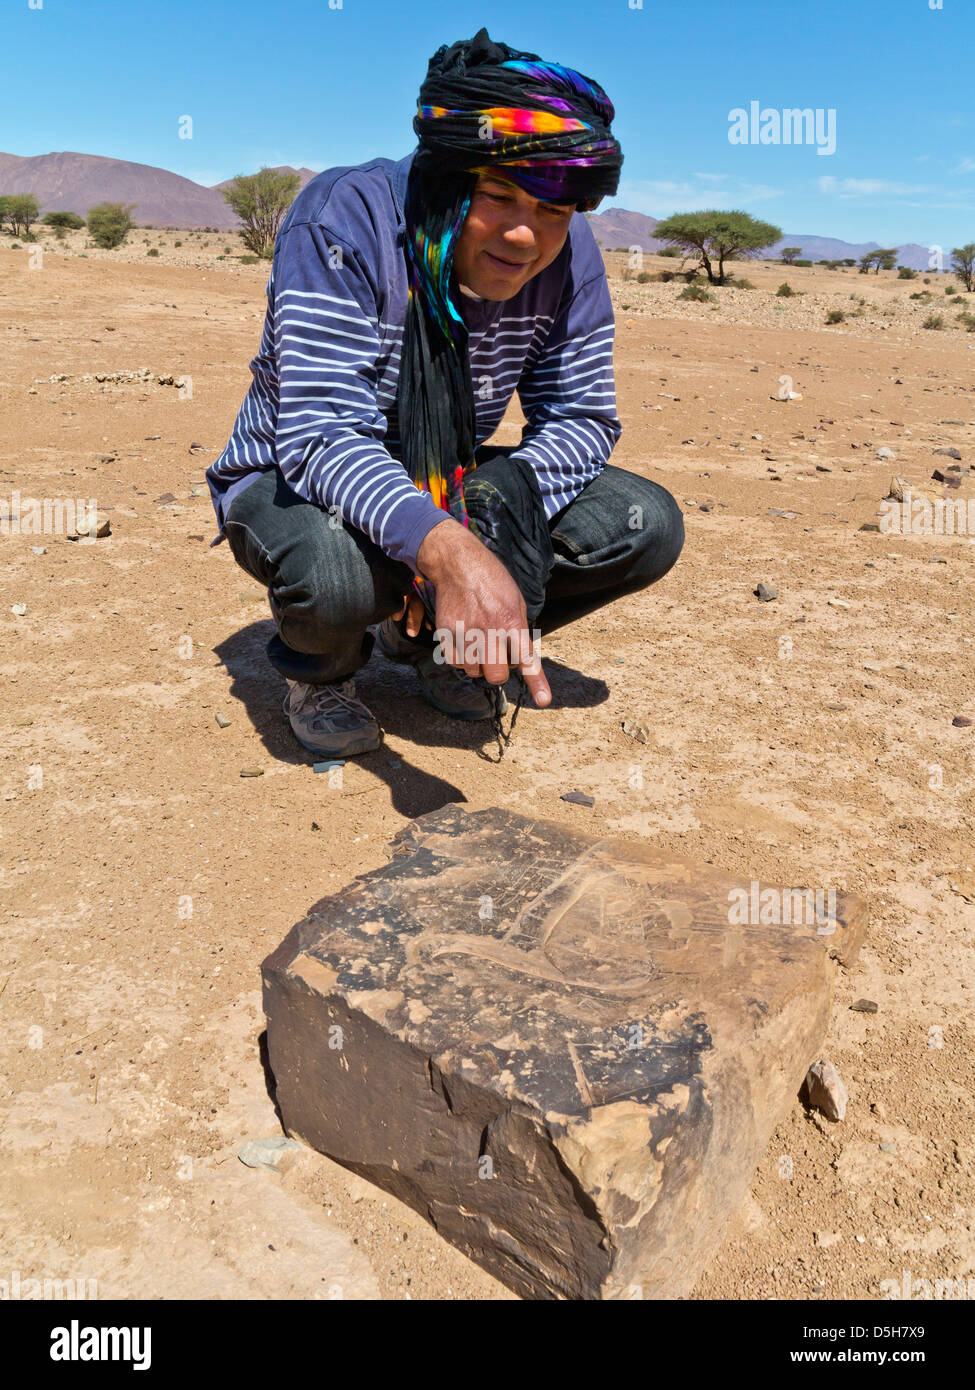 Brahim looking at Prehistoric rock carvings at Oued Mestakou on the Tata to Akka road in Morocco. Stock Photo